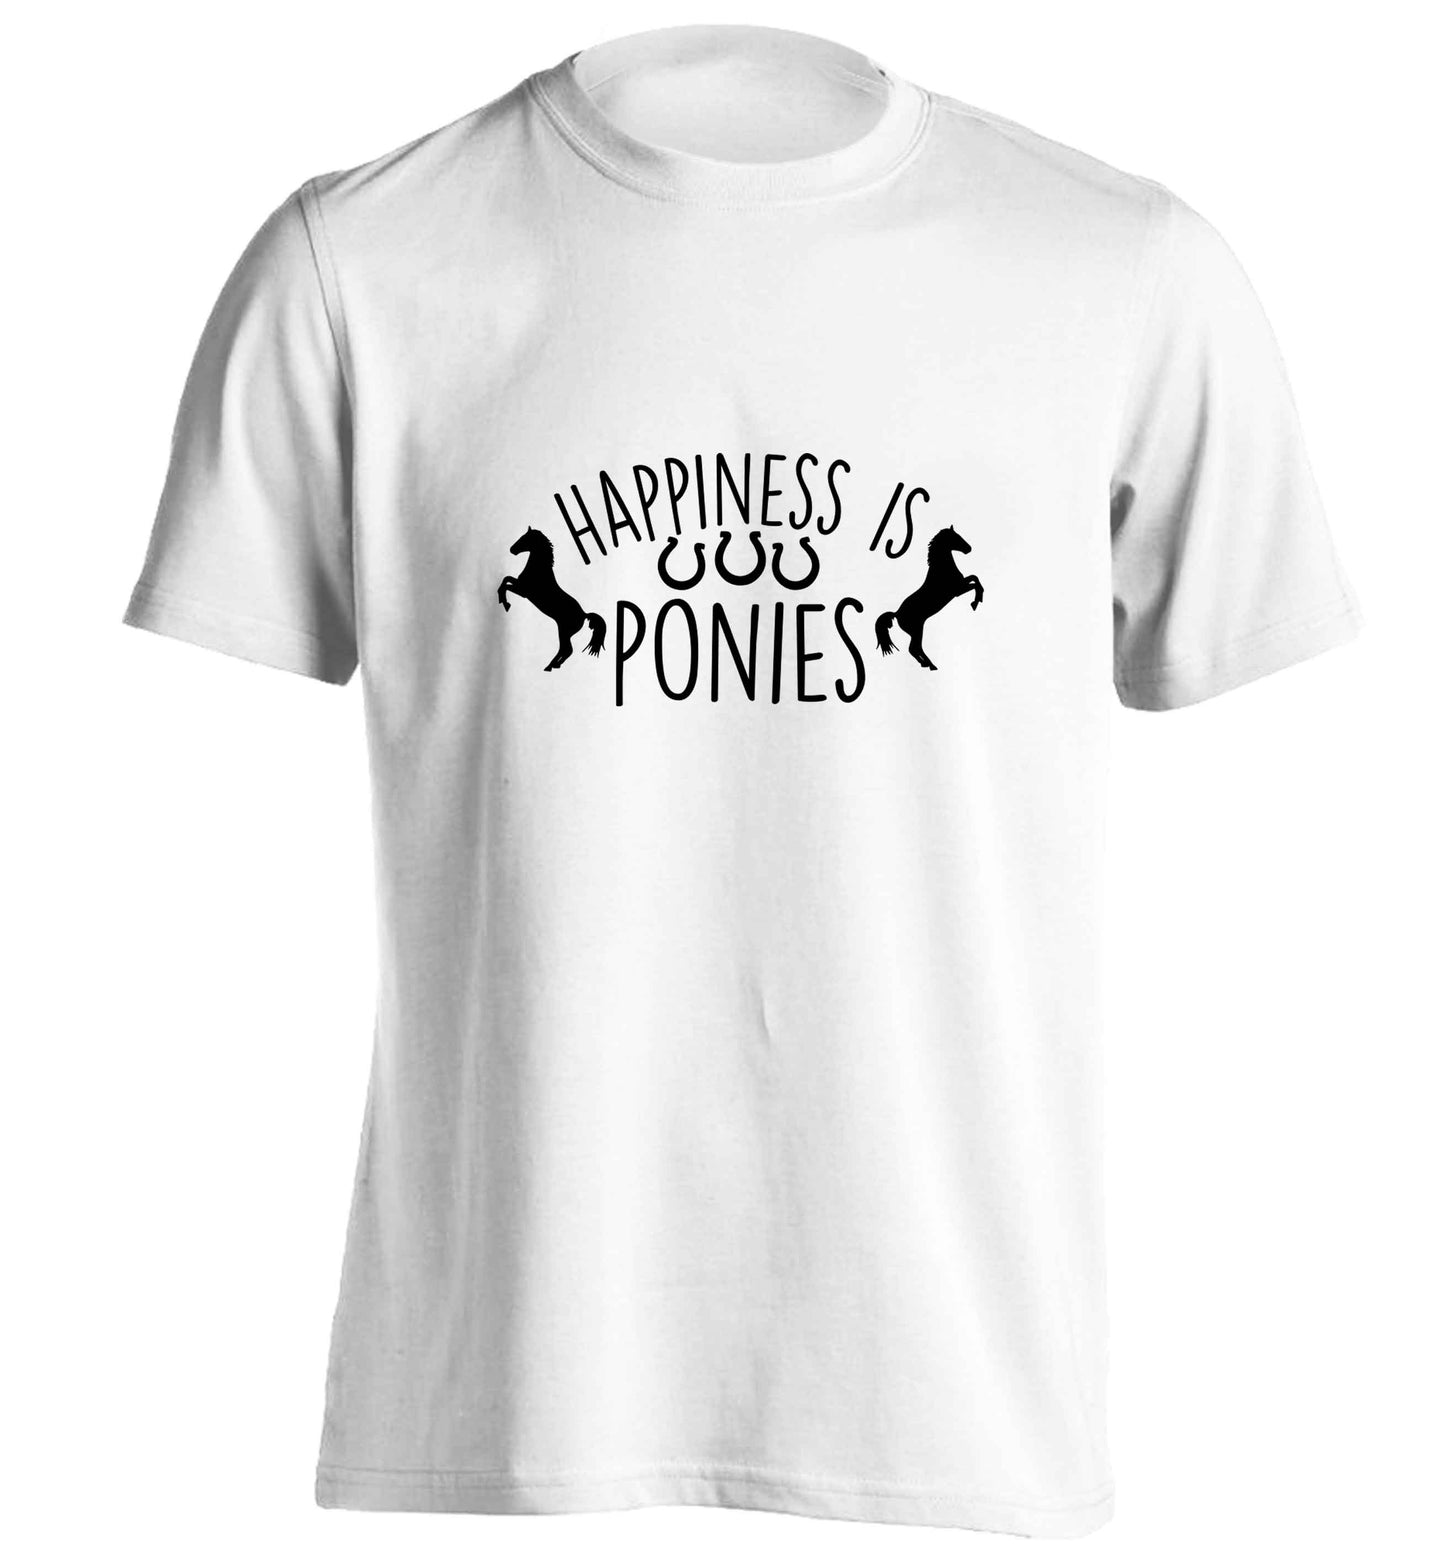 Happiness is ponies adults unisex white Tshirt 2XL